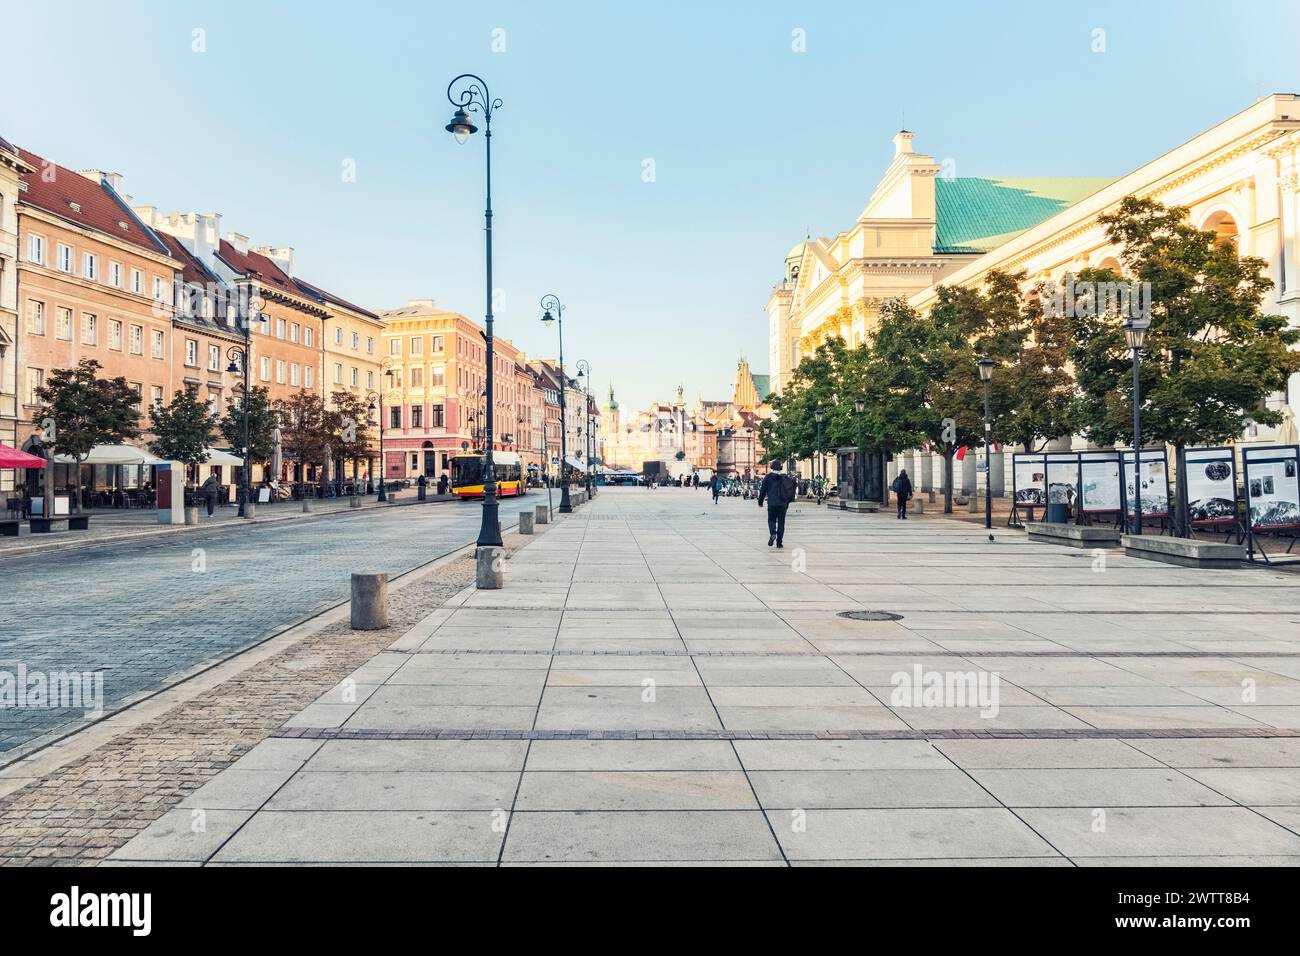 A peaceful morning on a European city street, with few pedestrians and historic buildings lining the way. Stock Photo